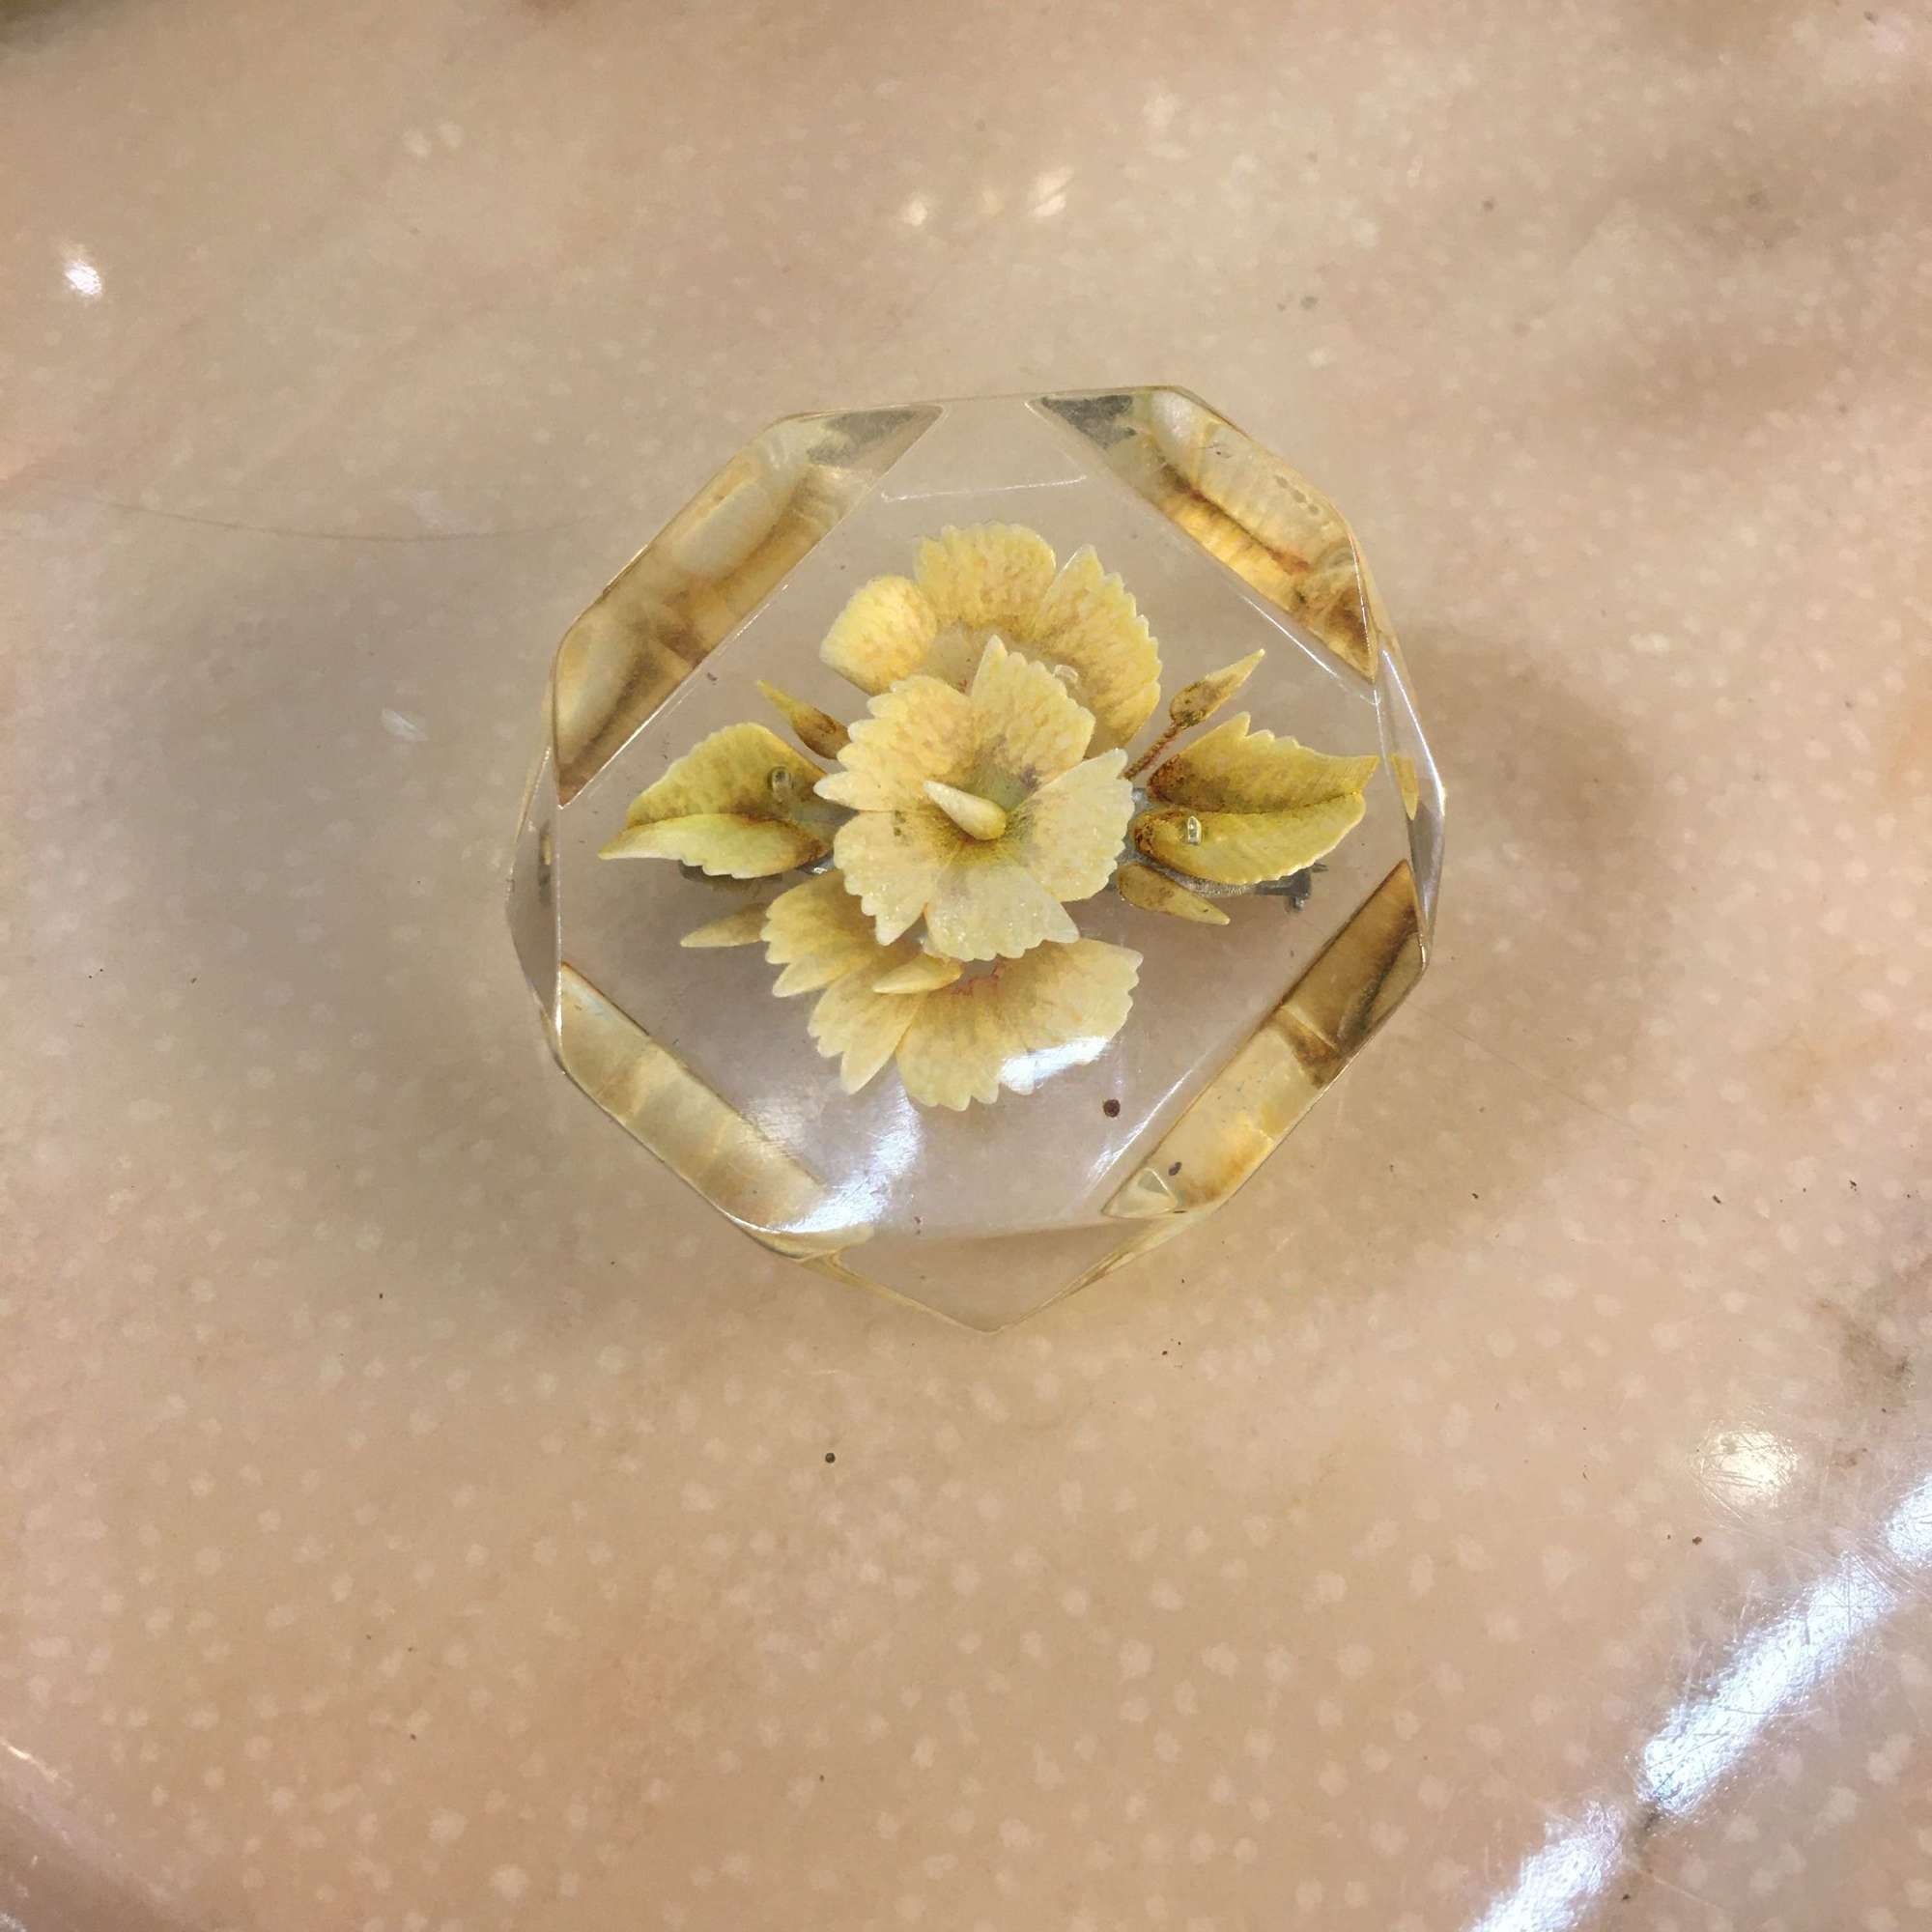 Vintage lucite yellow flower brooch